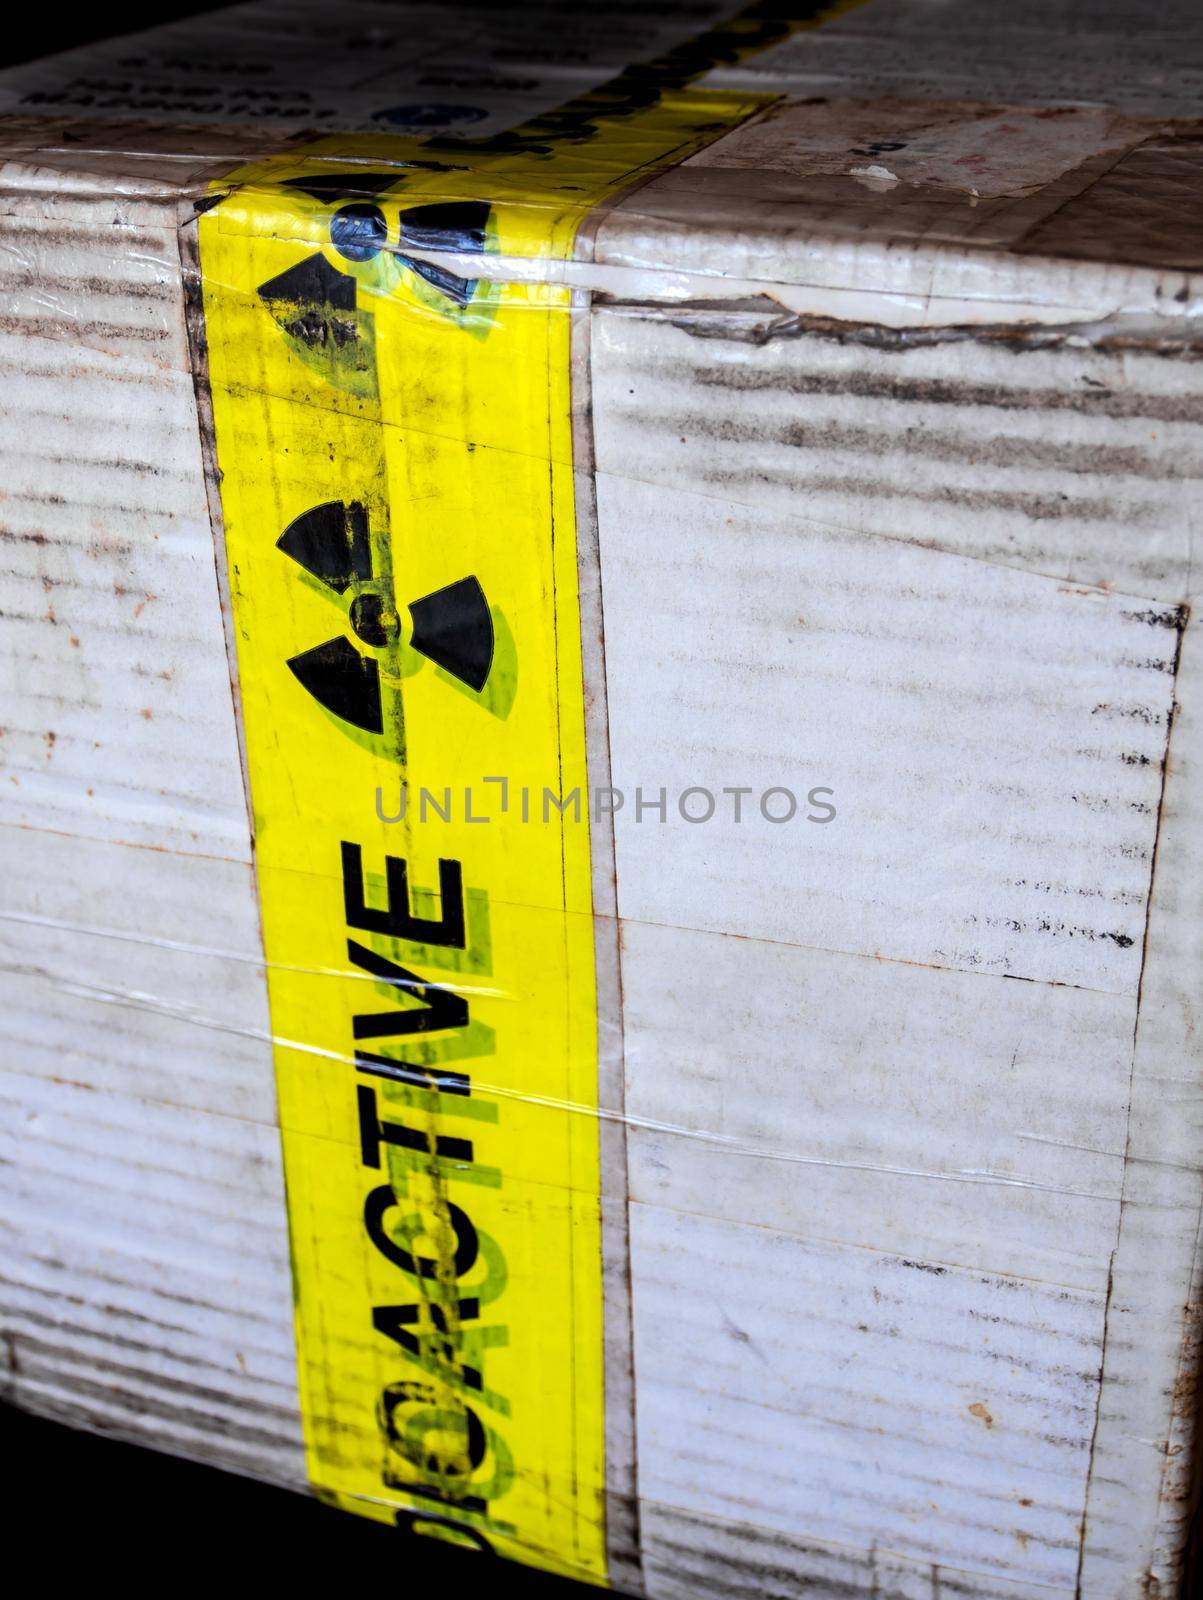 Paper box package of small radioactive material by Satakorn